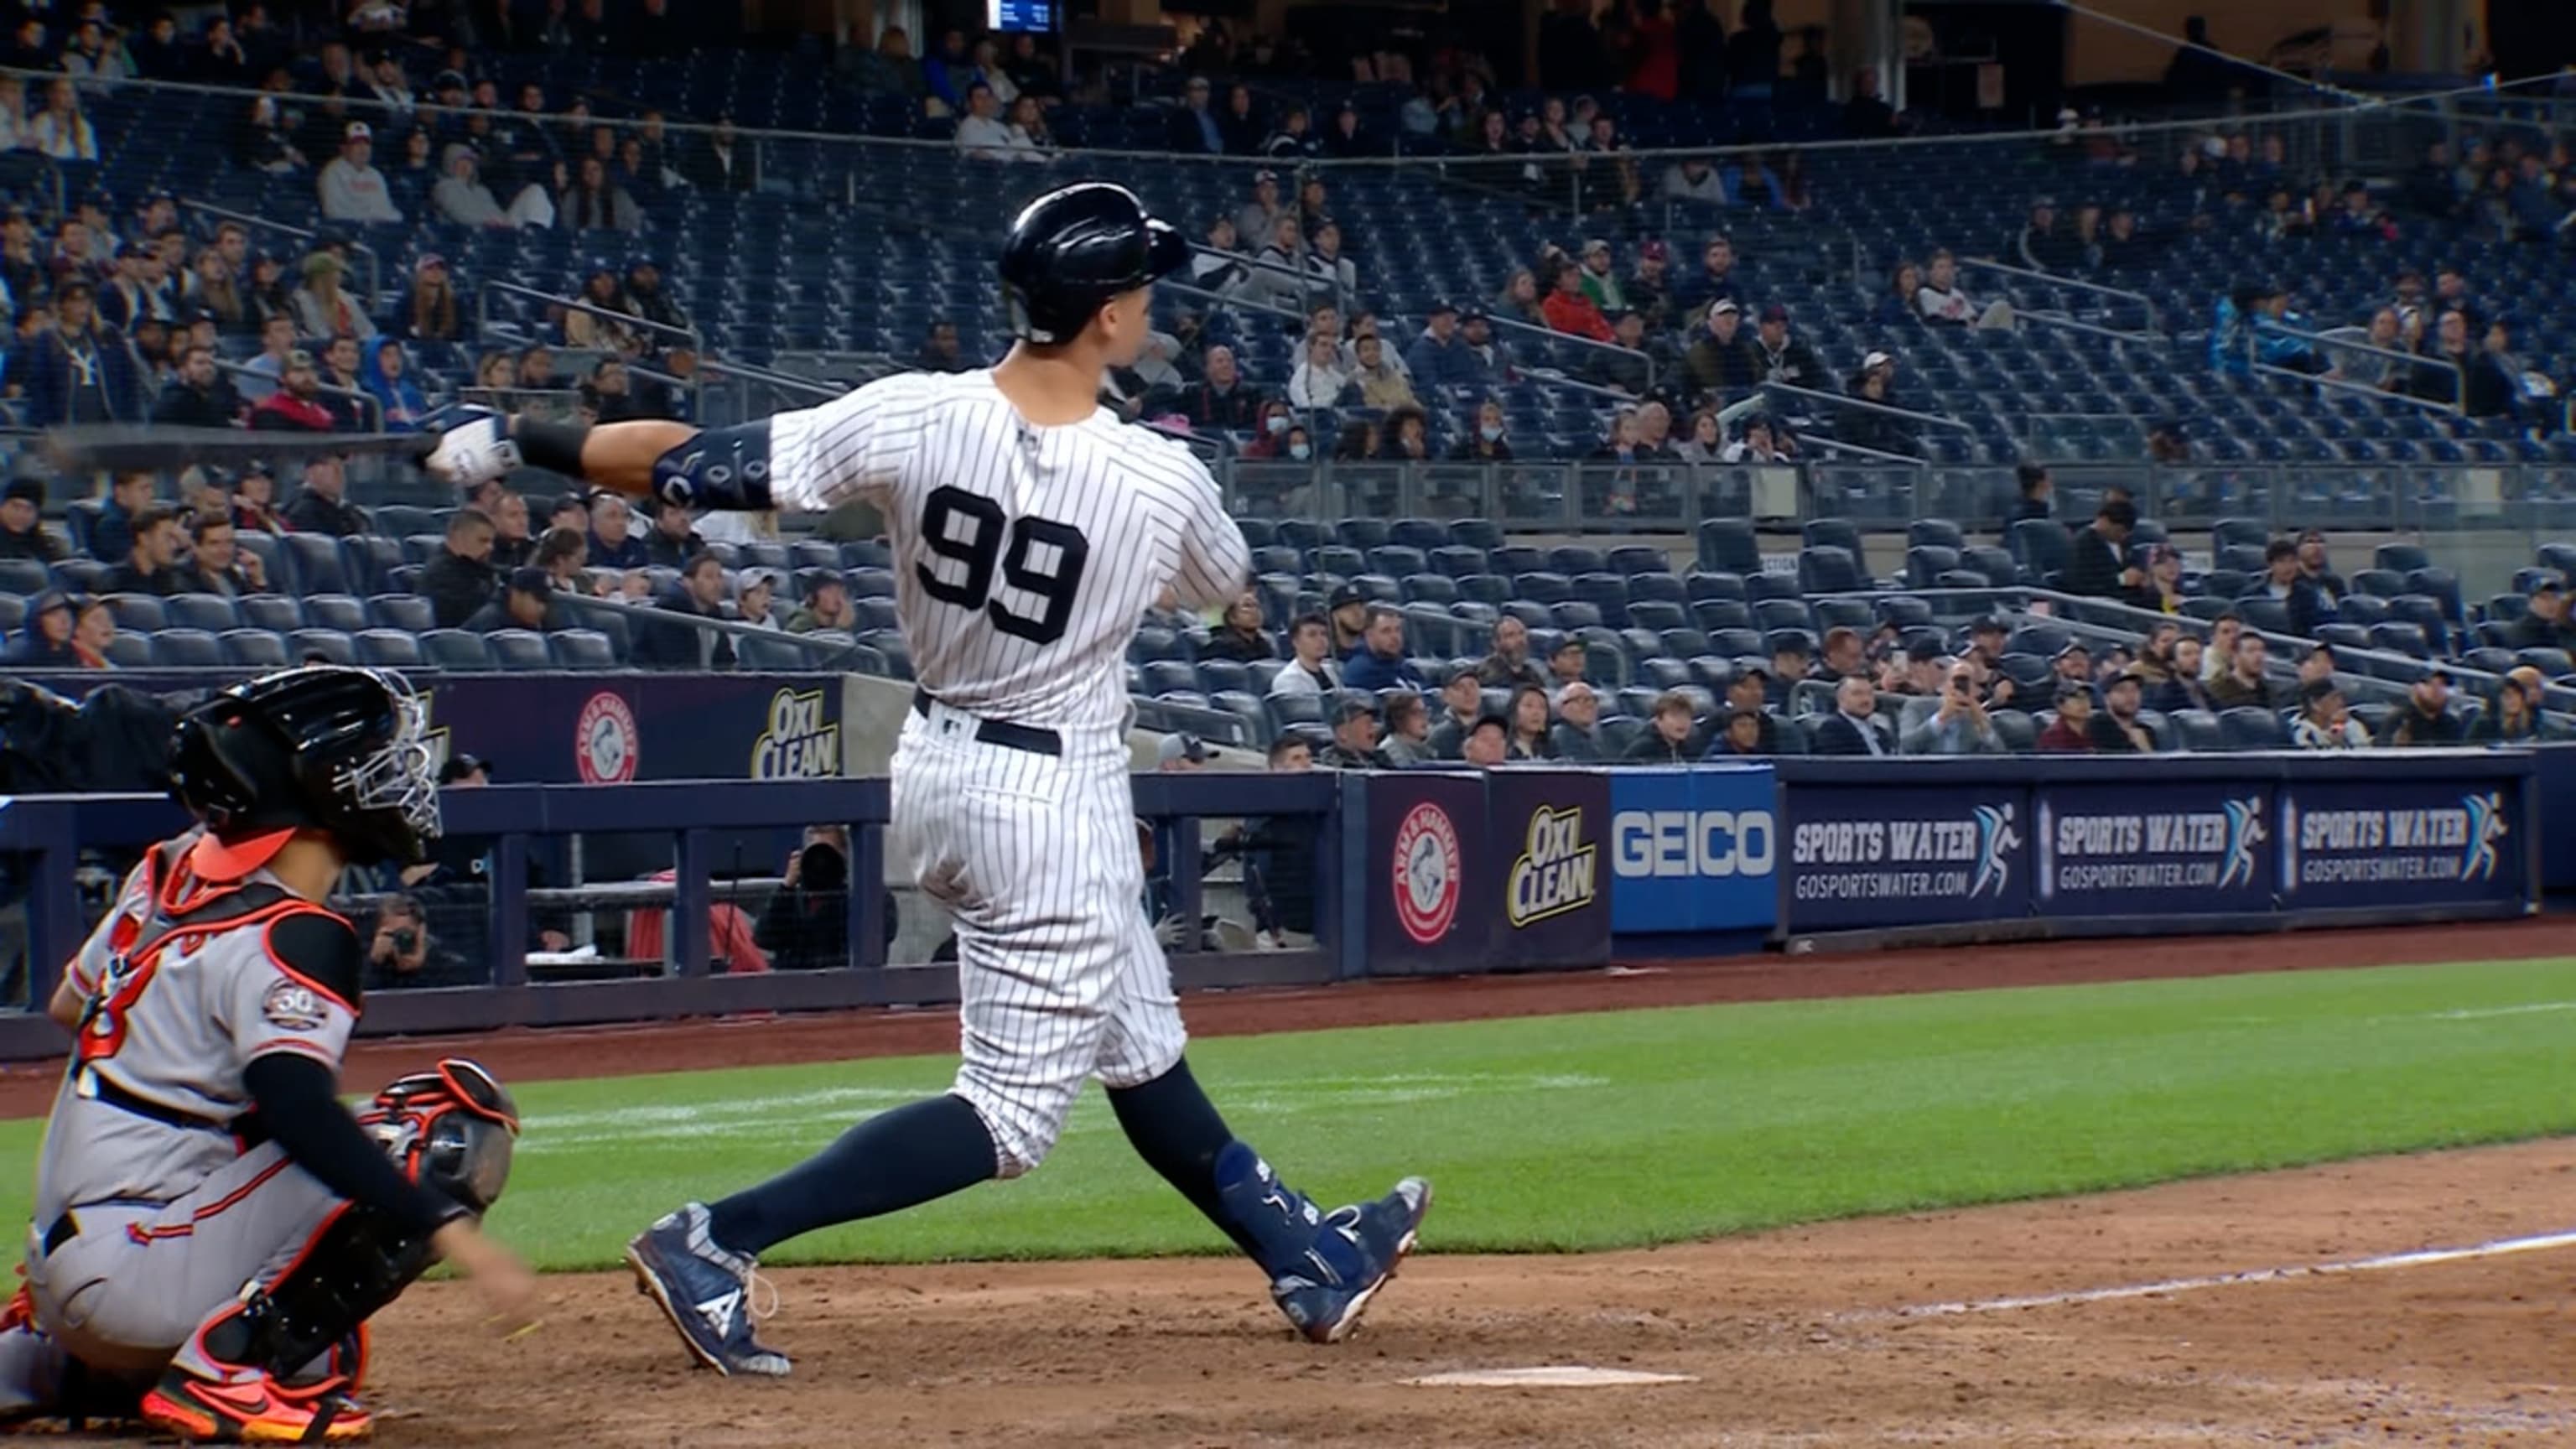 Anthony Rizzo hits go-ahead home run in Yankees' win over Rays